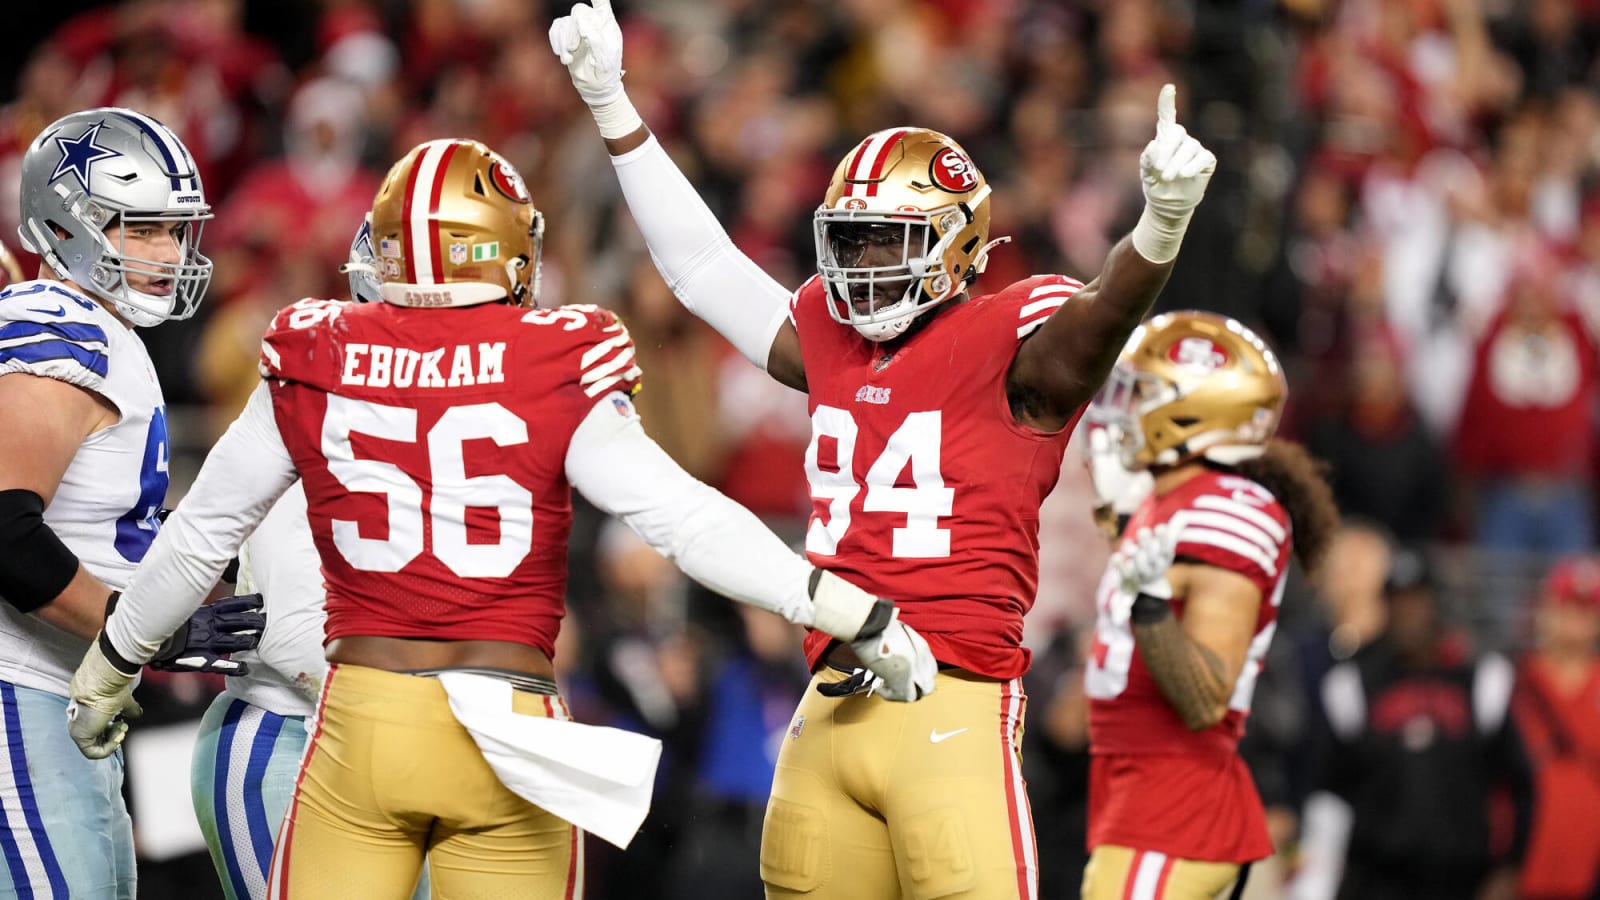 Samson Ebukam named as "unheralded player" who the 49ers should keep